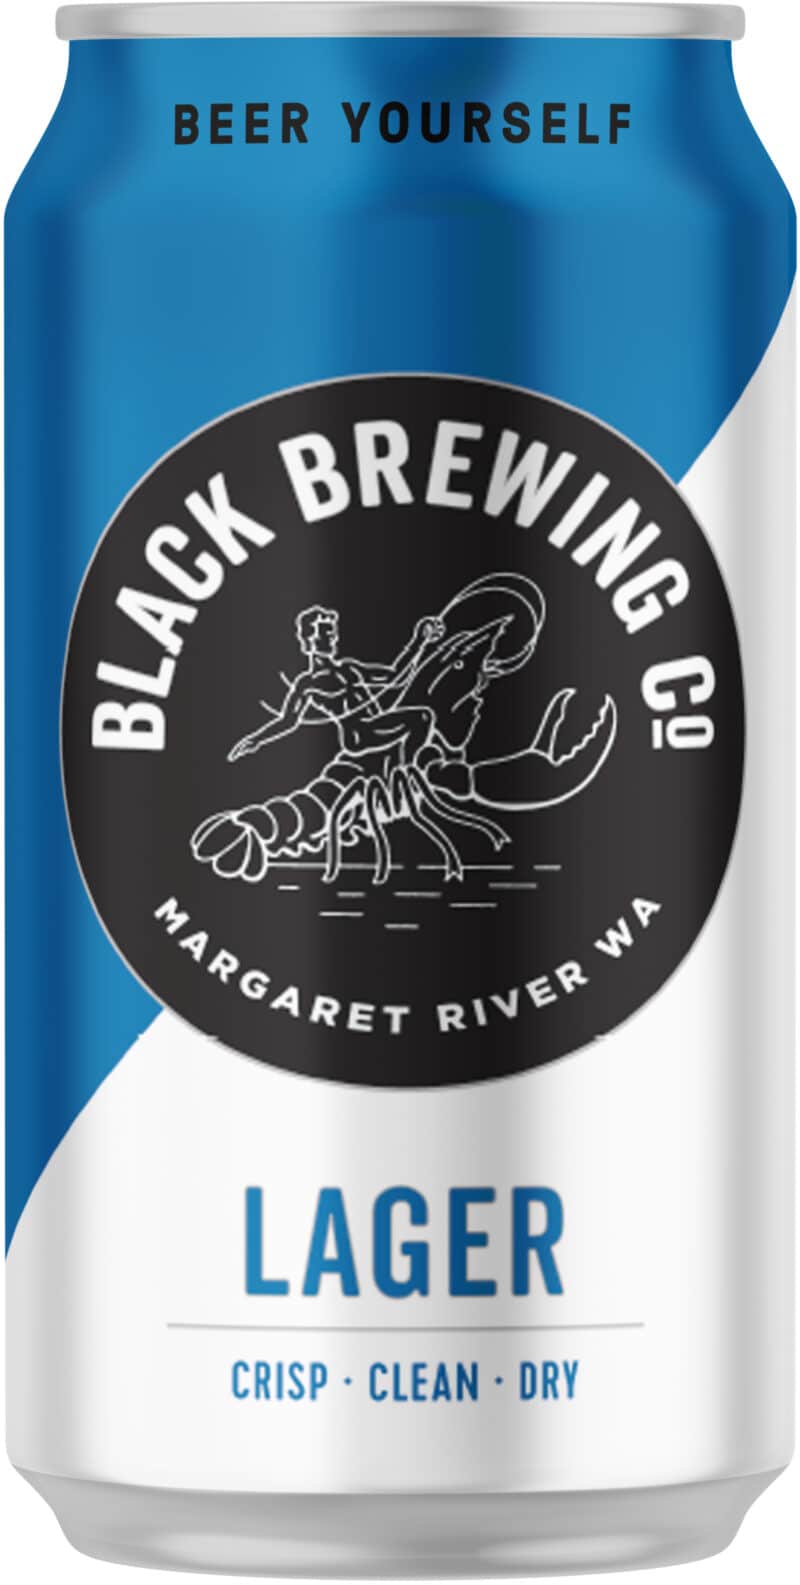 Black Brewing Lager 4.8% 375ml Can 16 Pack